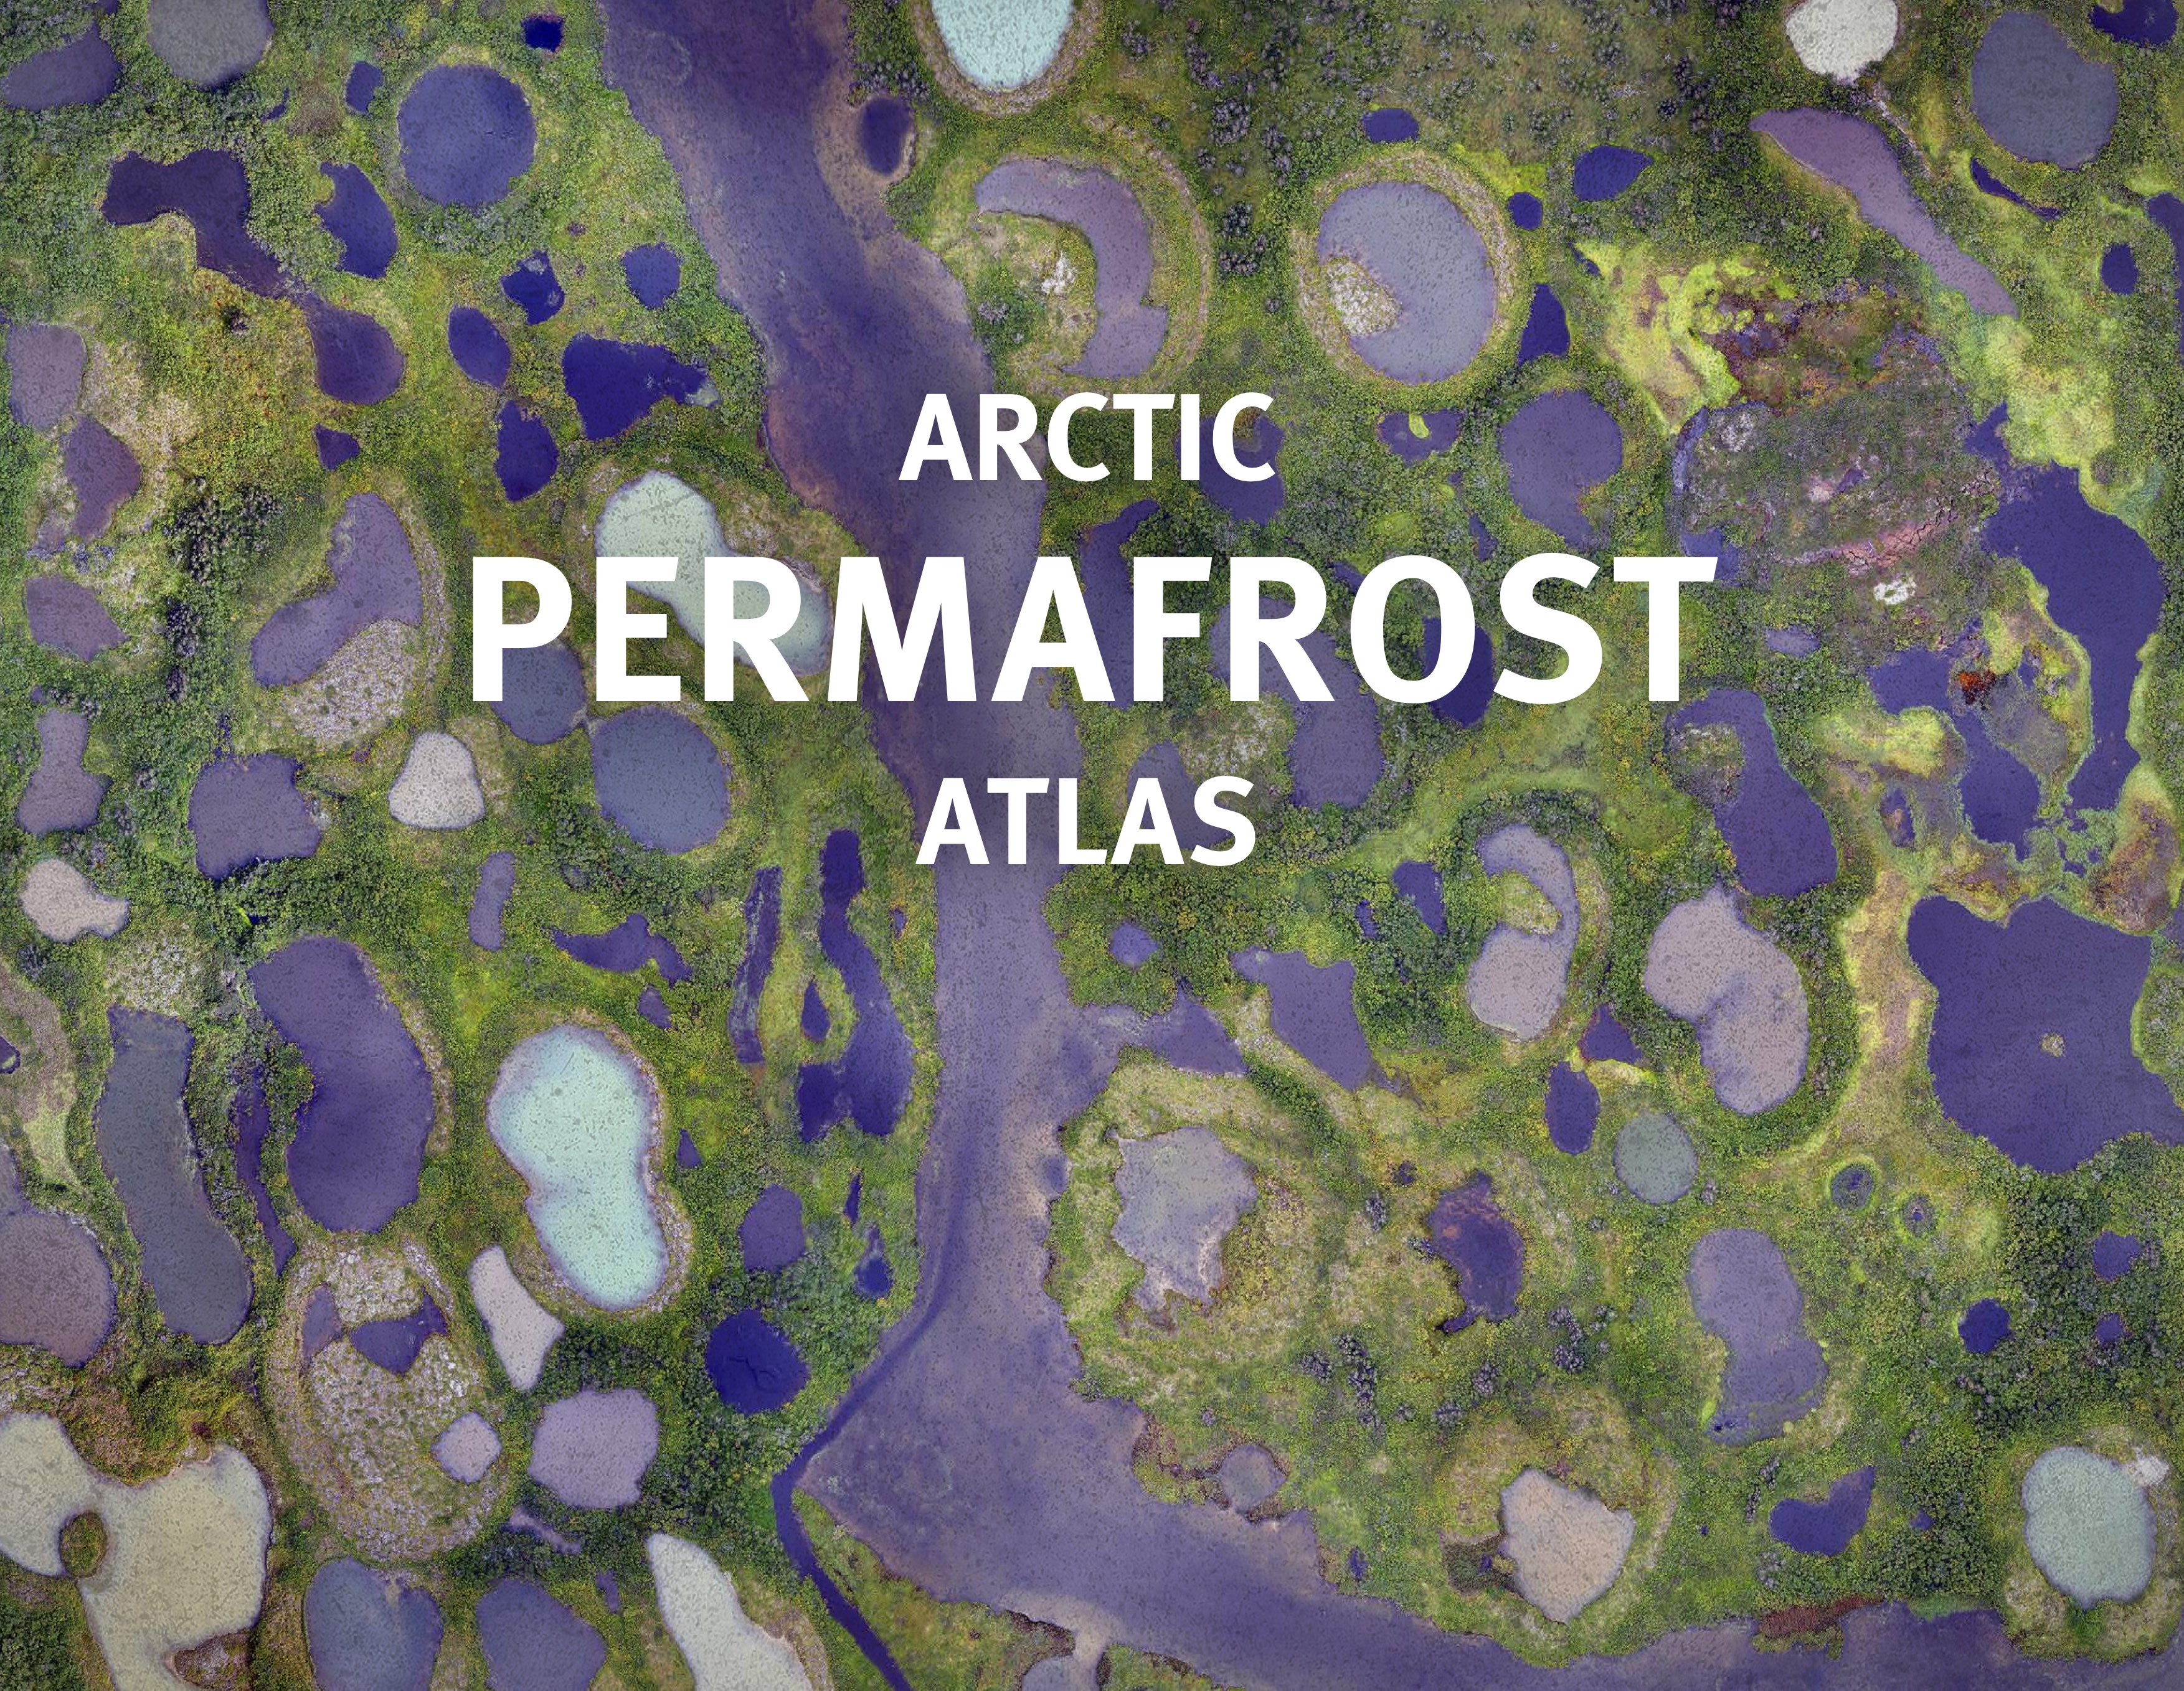 Arctic Permafrost atlas is now out